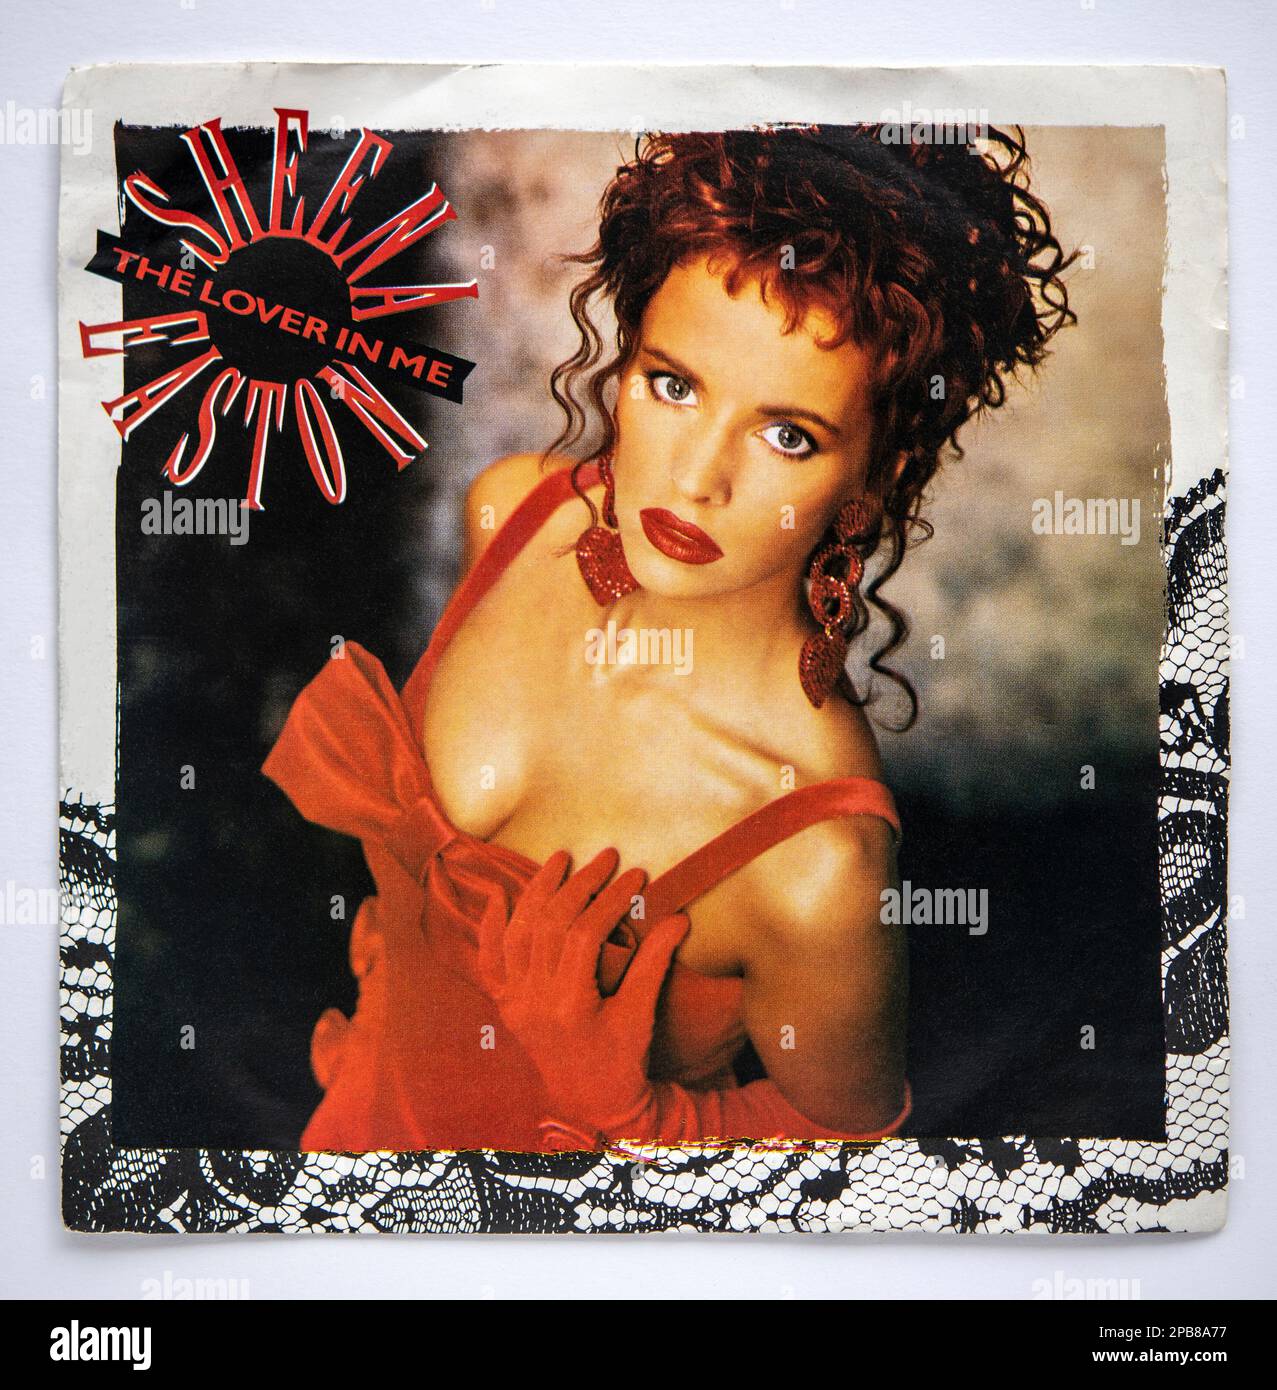 Picture cover of the seven inch single version of The Lover in Me by Sheena Easton, which was released in 1988 Stock Photo